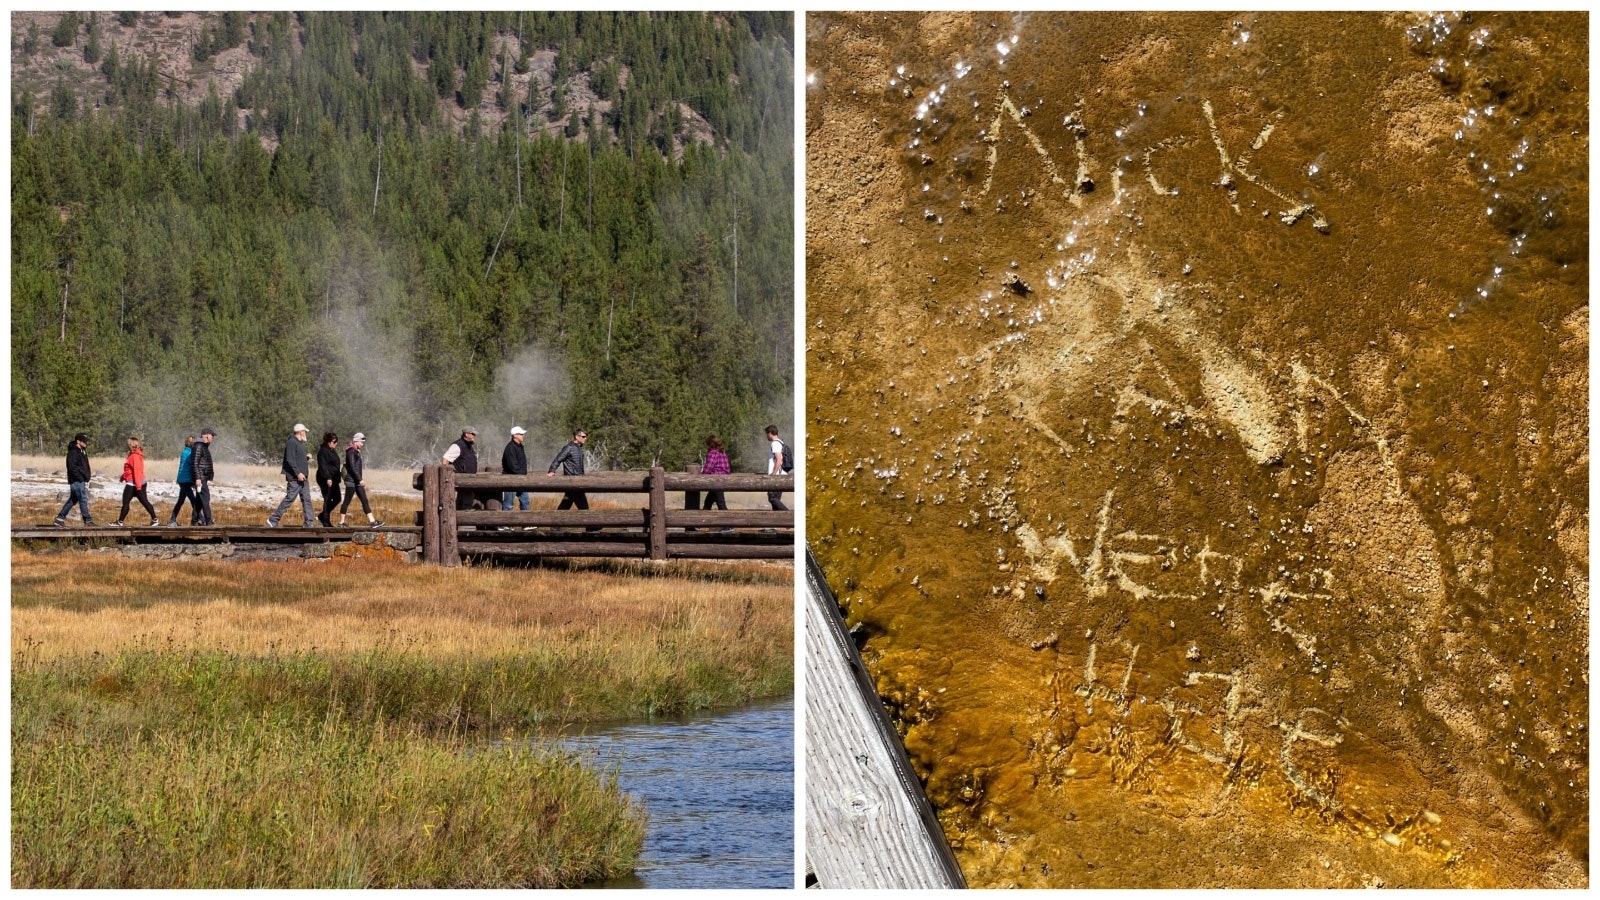 Seems some guy named Nick loves the unique features at Yellowstone National Park — so much so that Nick scratched his name and a message into a delicate thermal area just off the Biscuit Basin boardwalk.